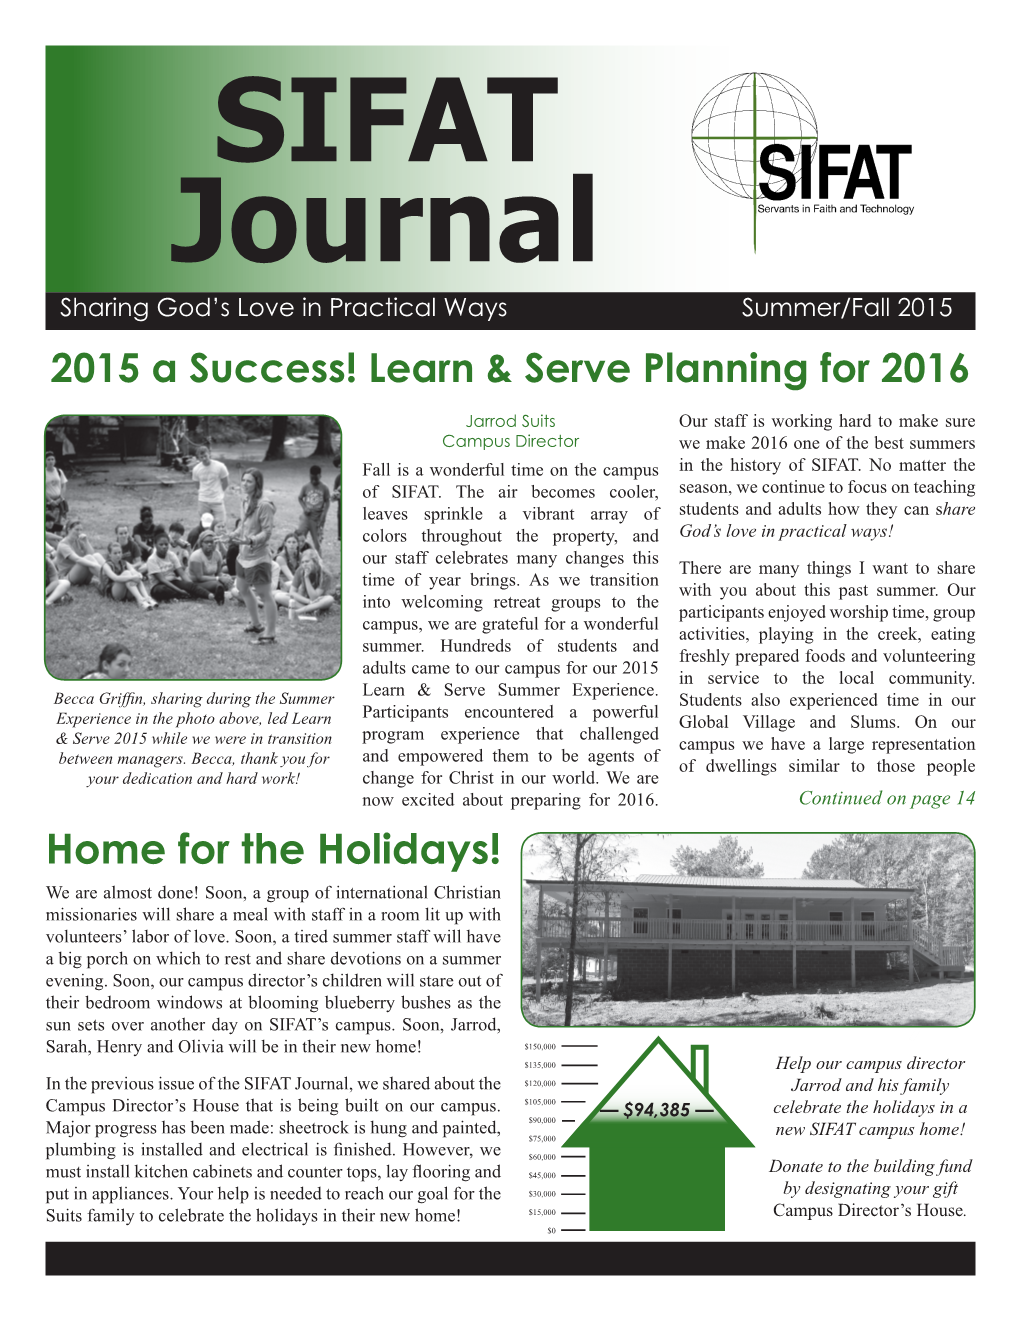 SIFAT Journal Home for the Holidays!